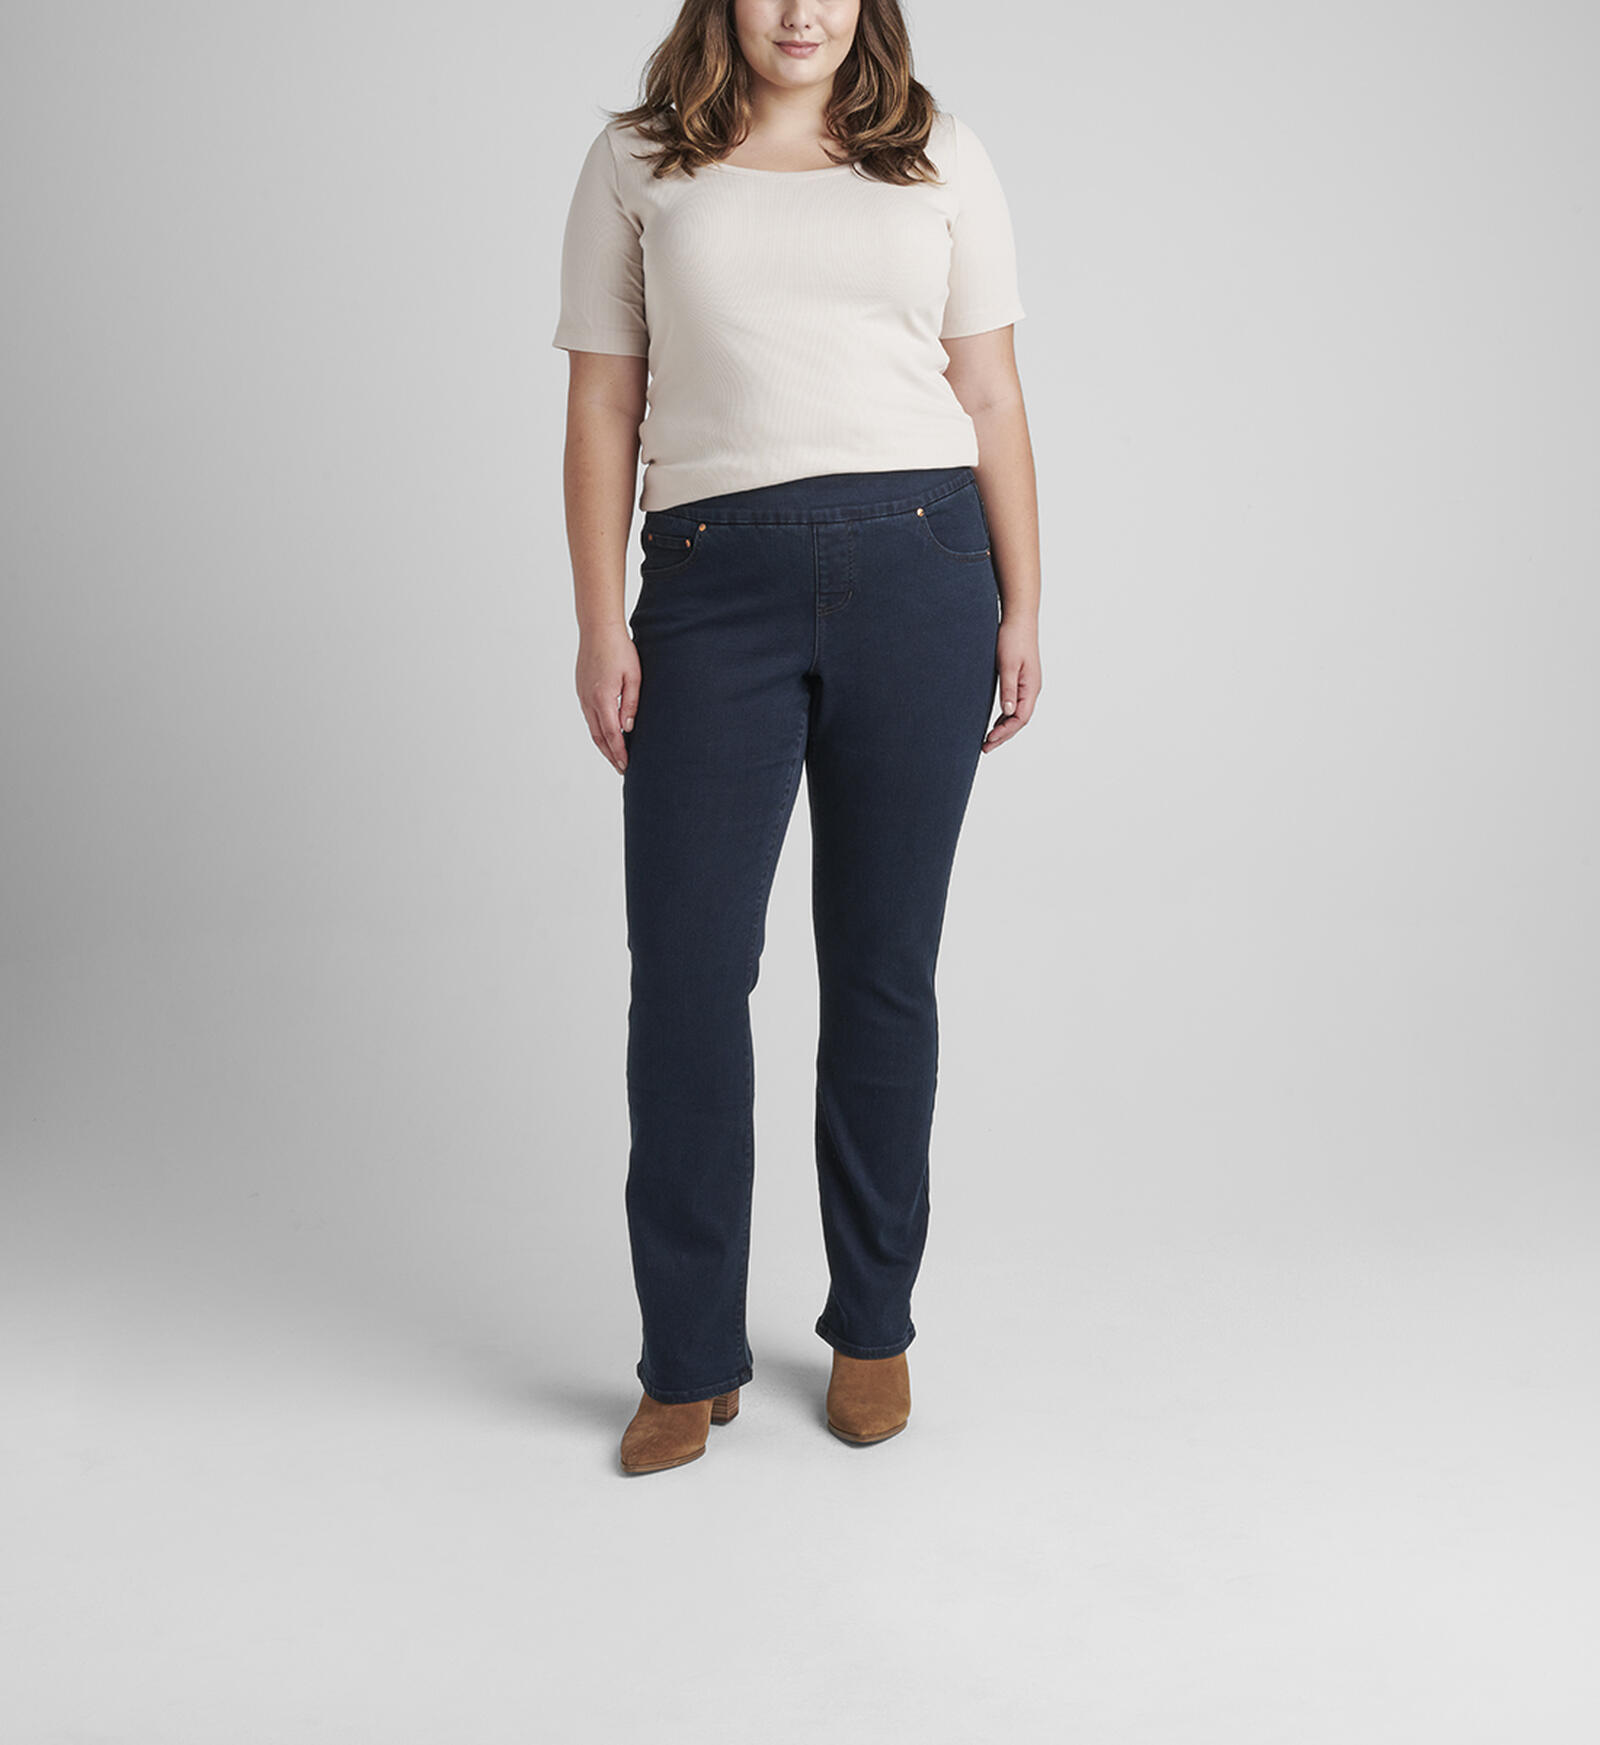 Plus Size High Waisted Bootcut Jeans